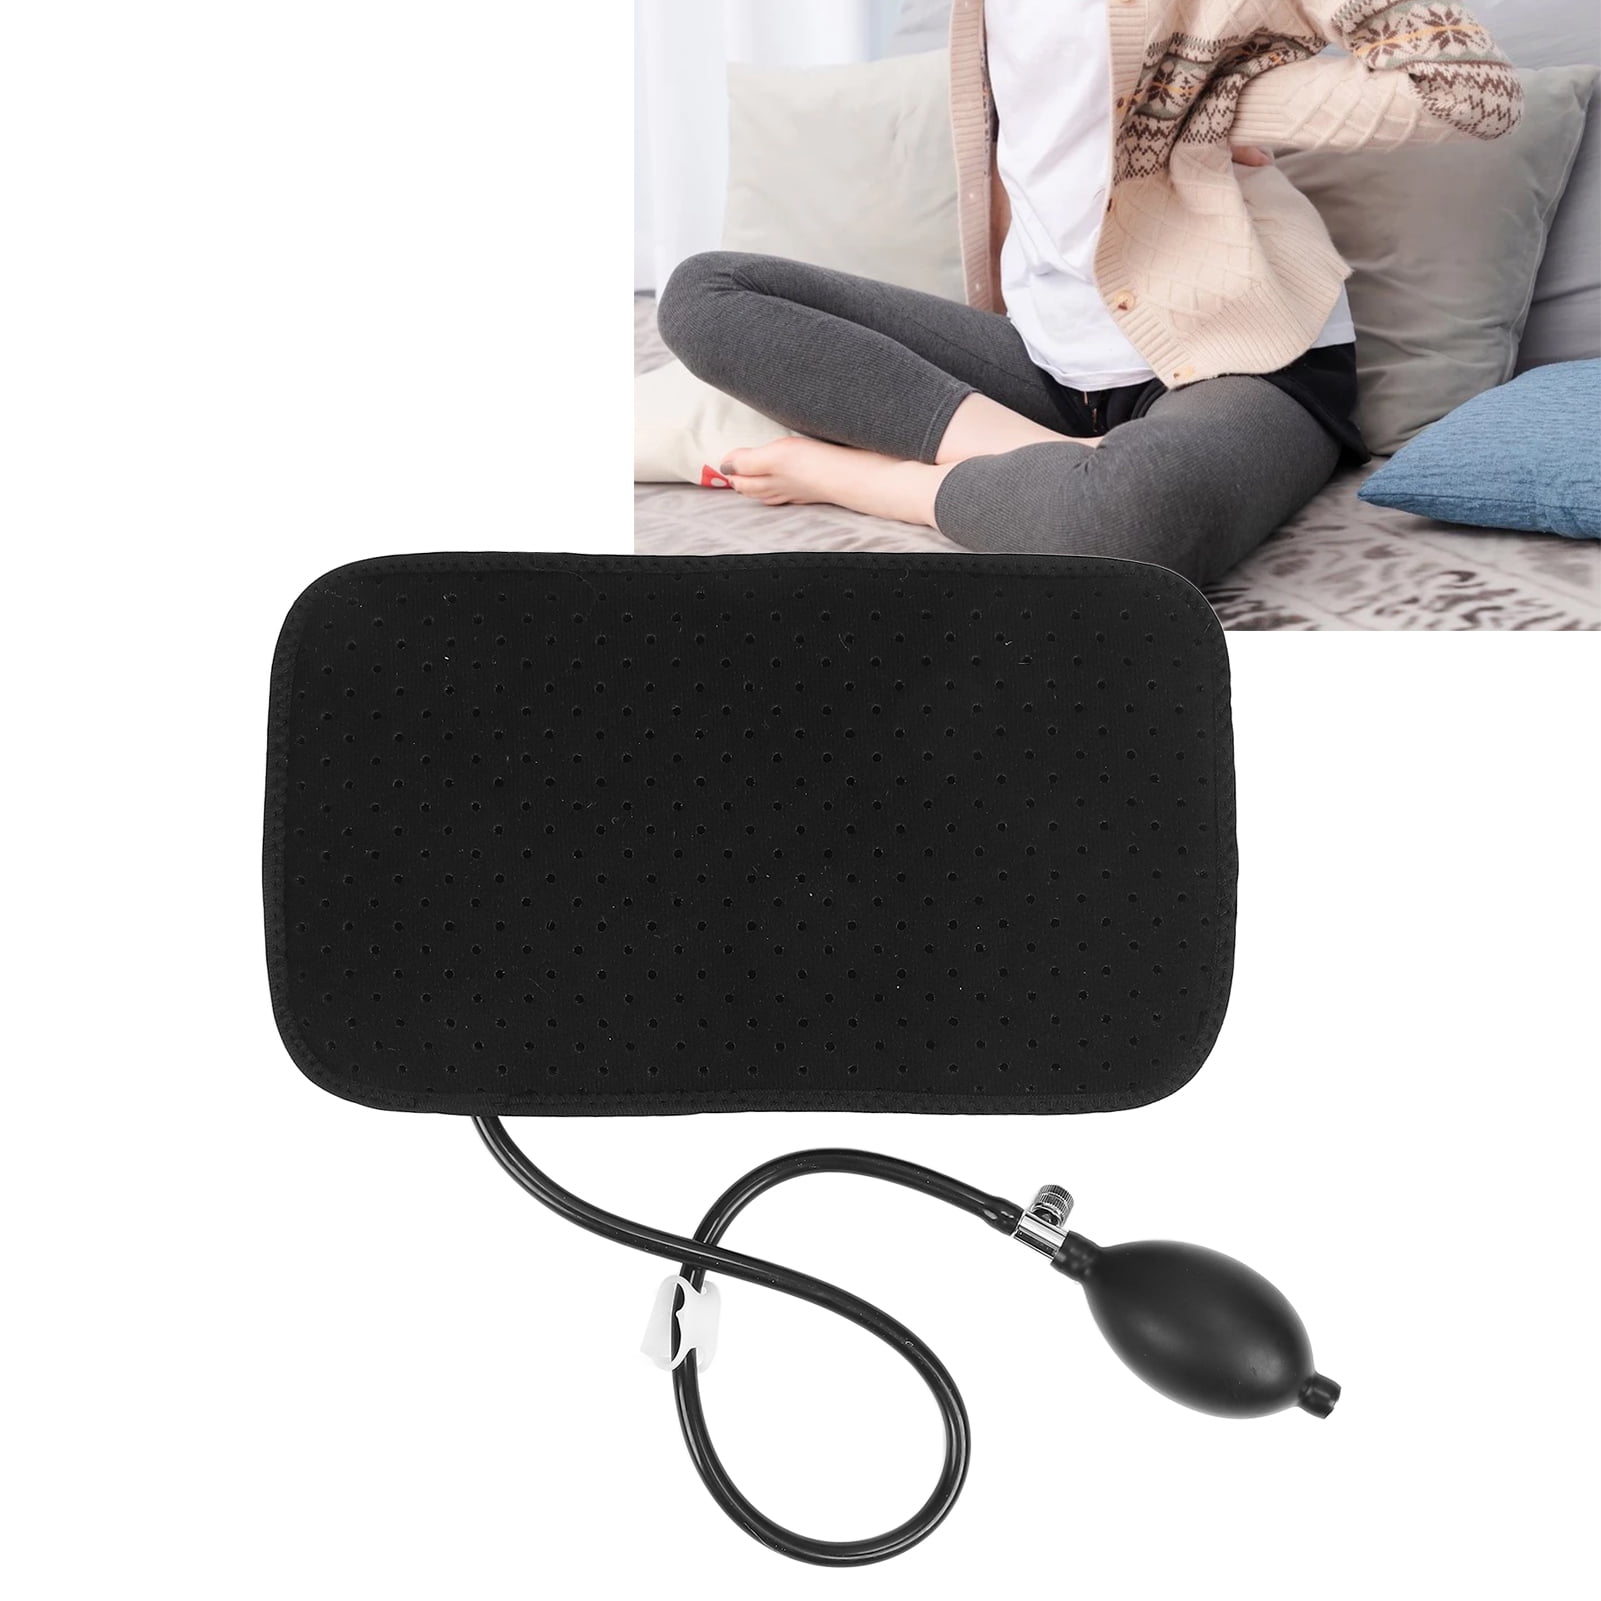 POPIPEN Inflatable Lumbar Support Pillow for Office Chair and Car Seat,  Back Support Cushion with Air Pump for Reducing Lower Back Pain